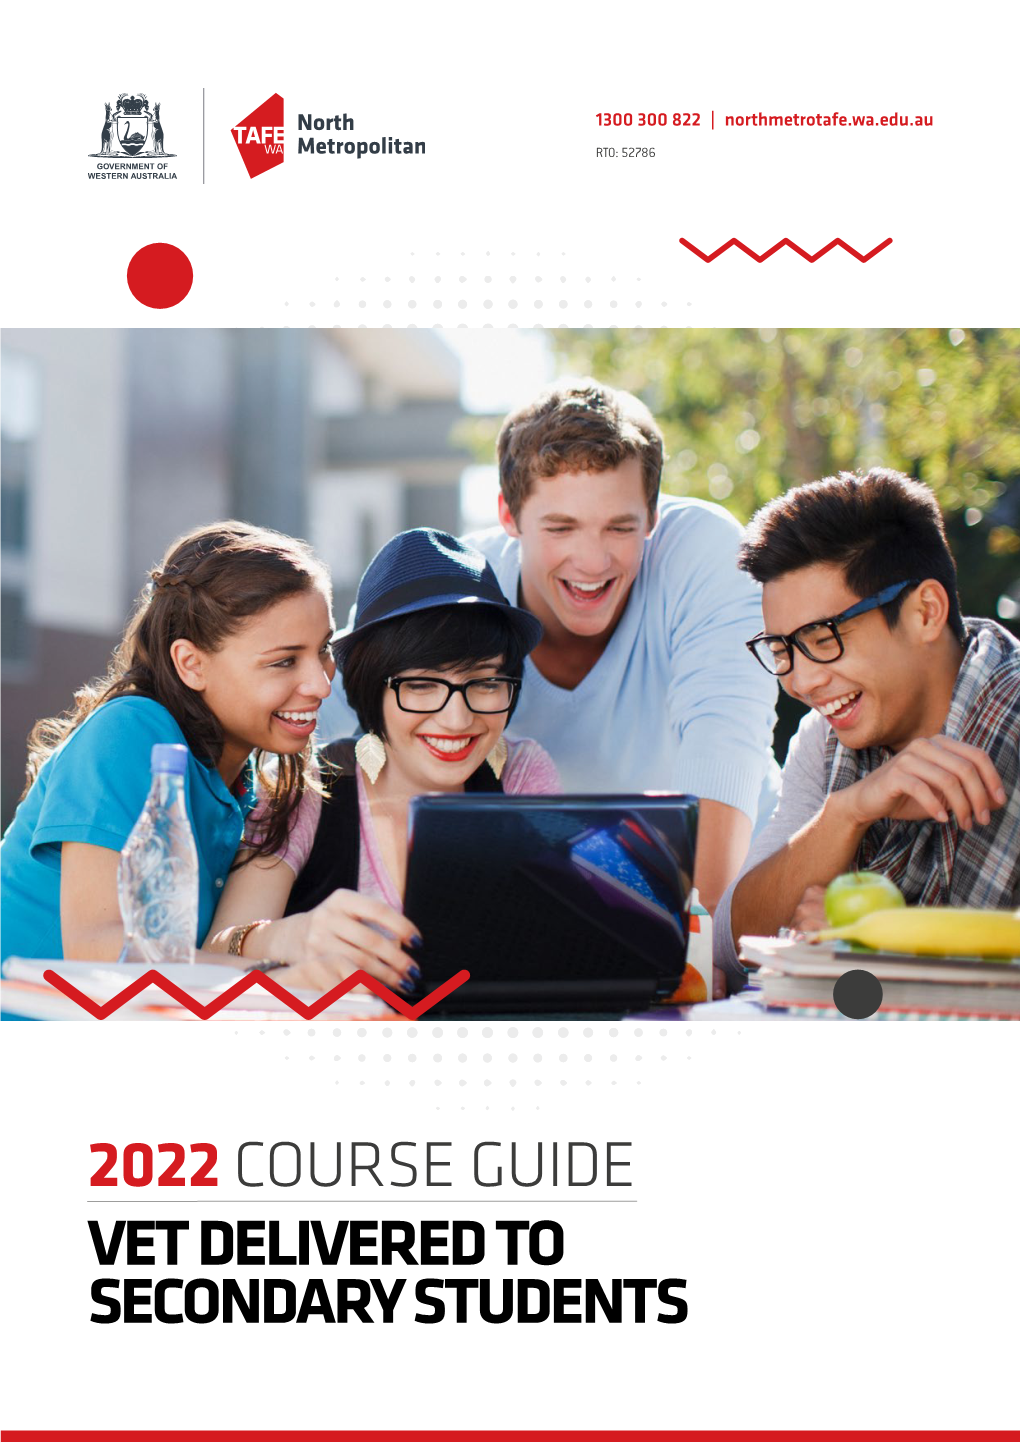 2022 COURSE GUIDE VET DELIVERED to SECONDARY STUDENTS Contents